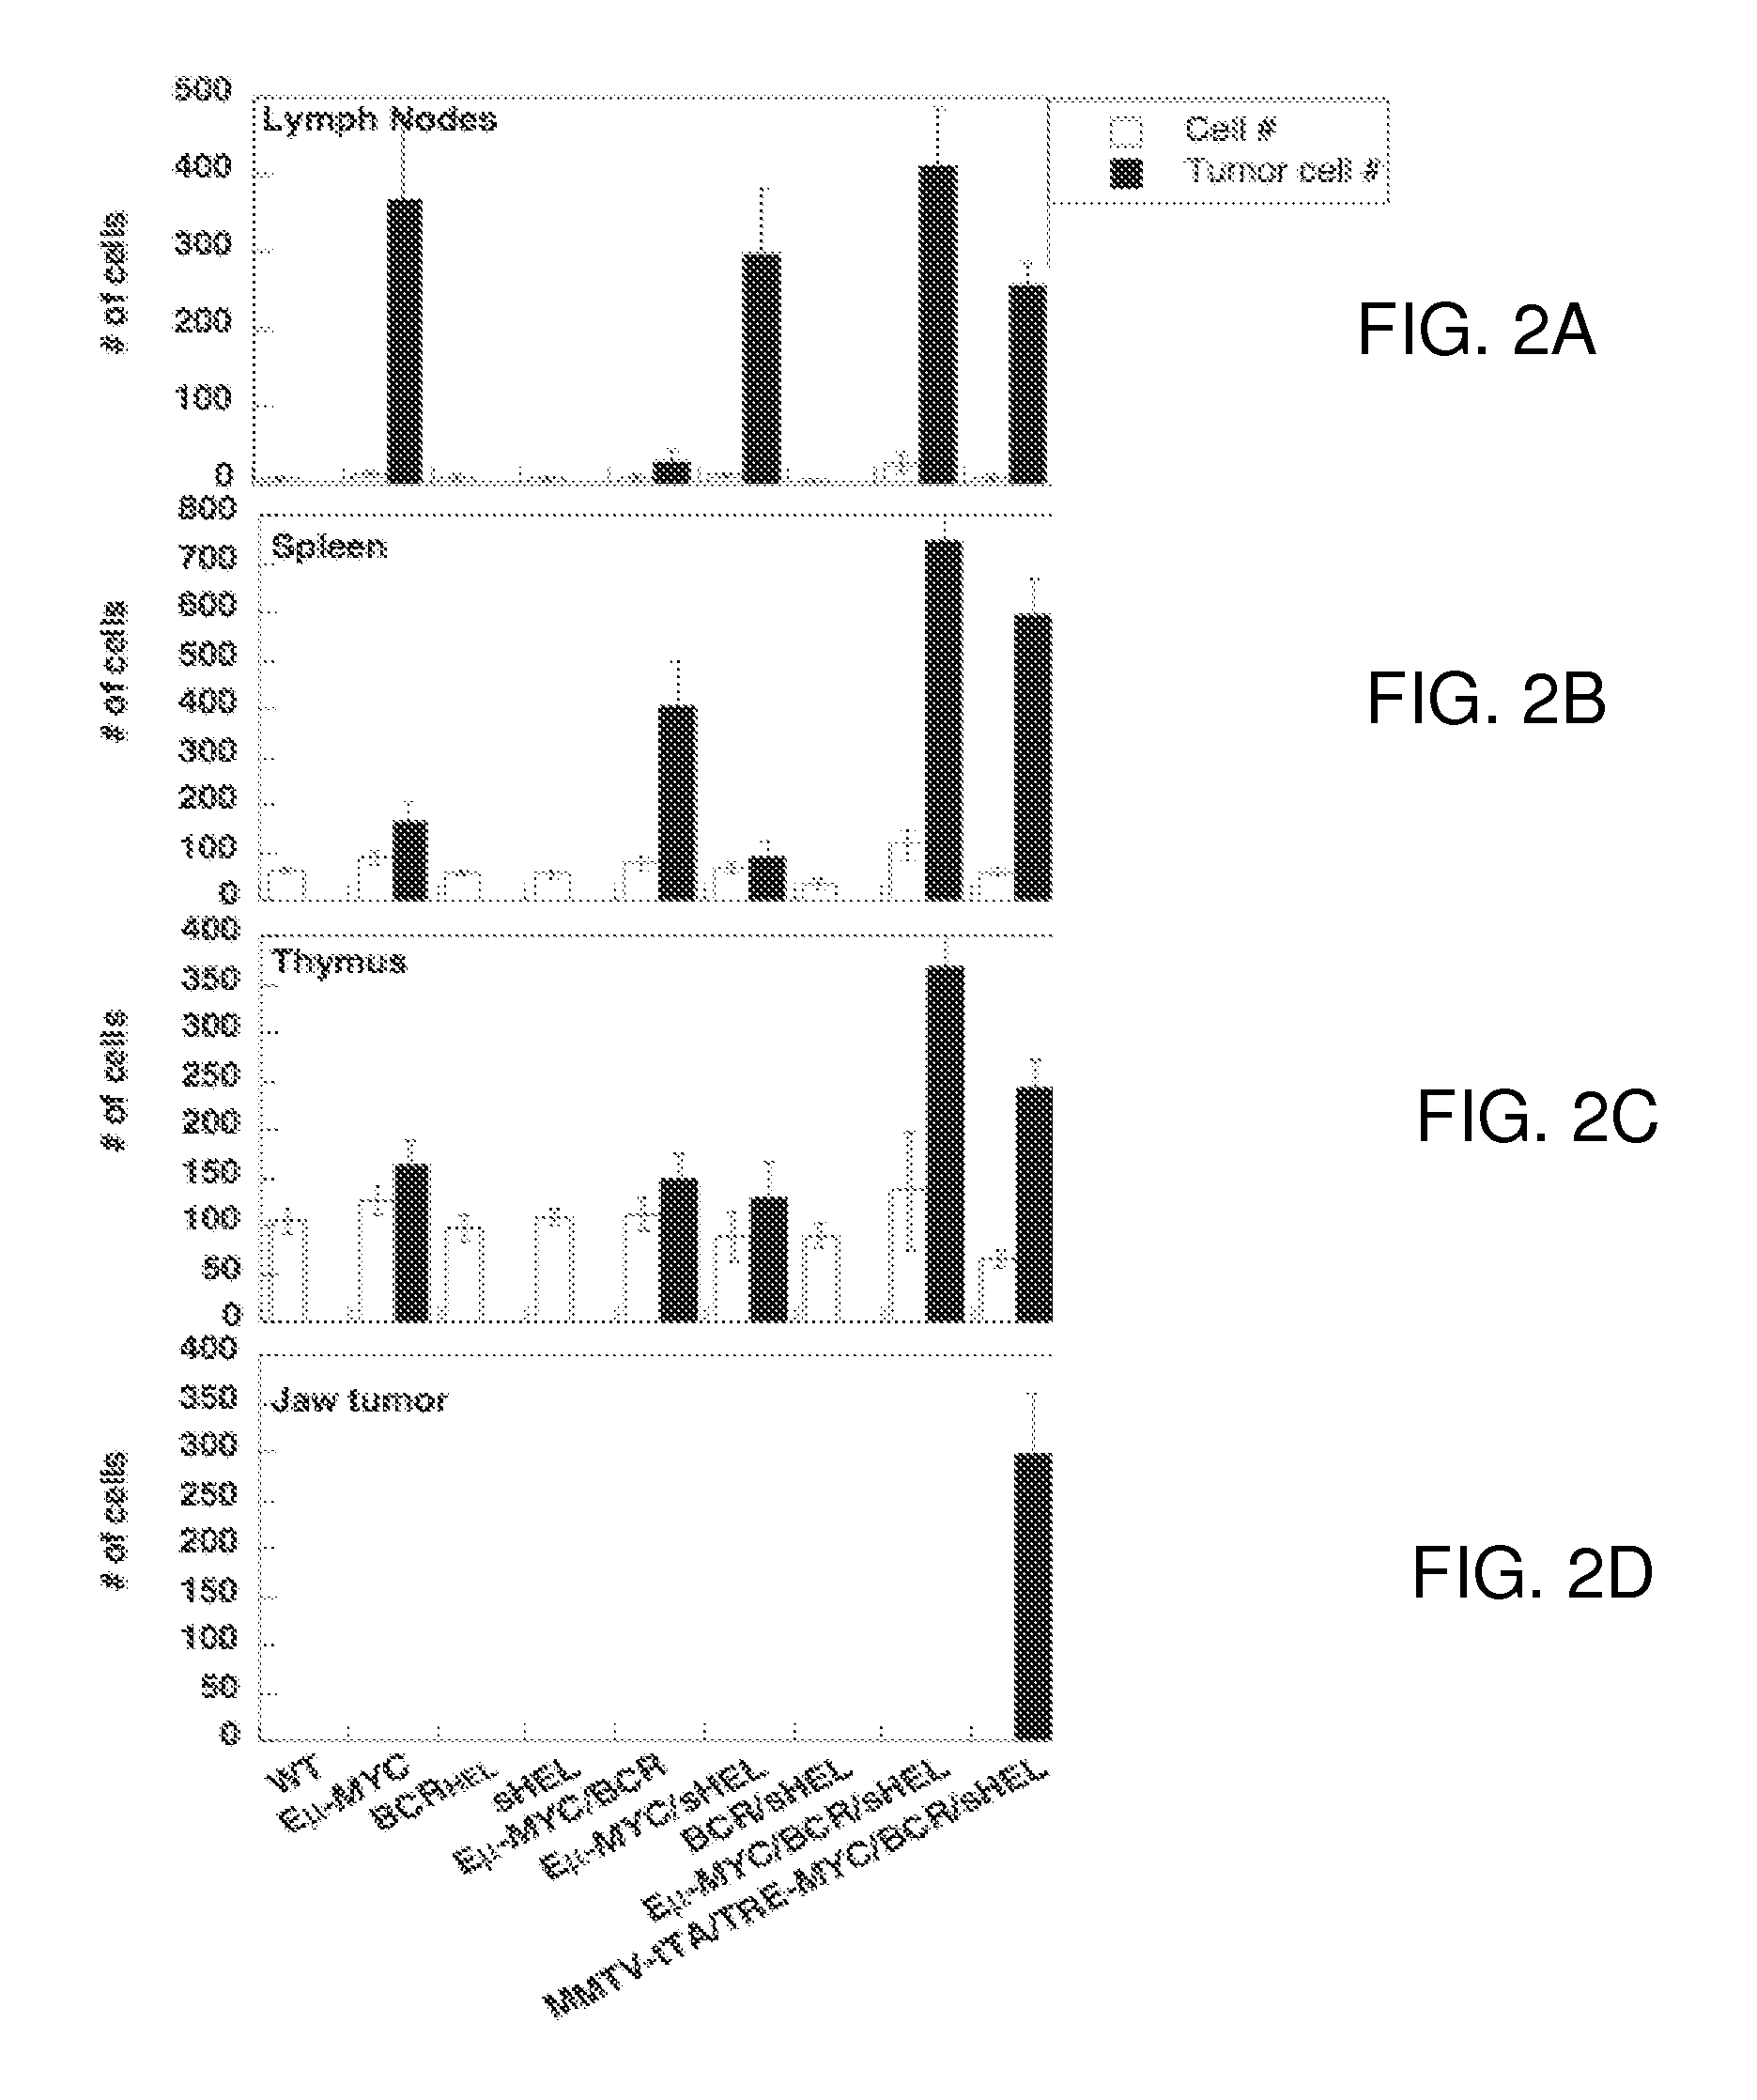 Non-Human Animal Models for B-cell Non-Hodgkin's Lymphoma and Uses Thereof